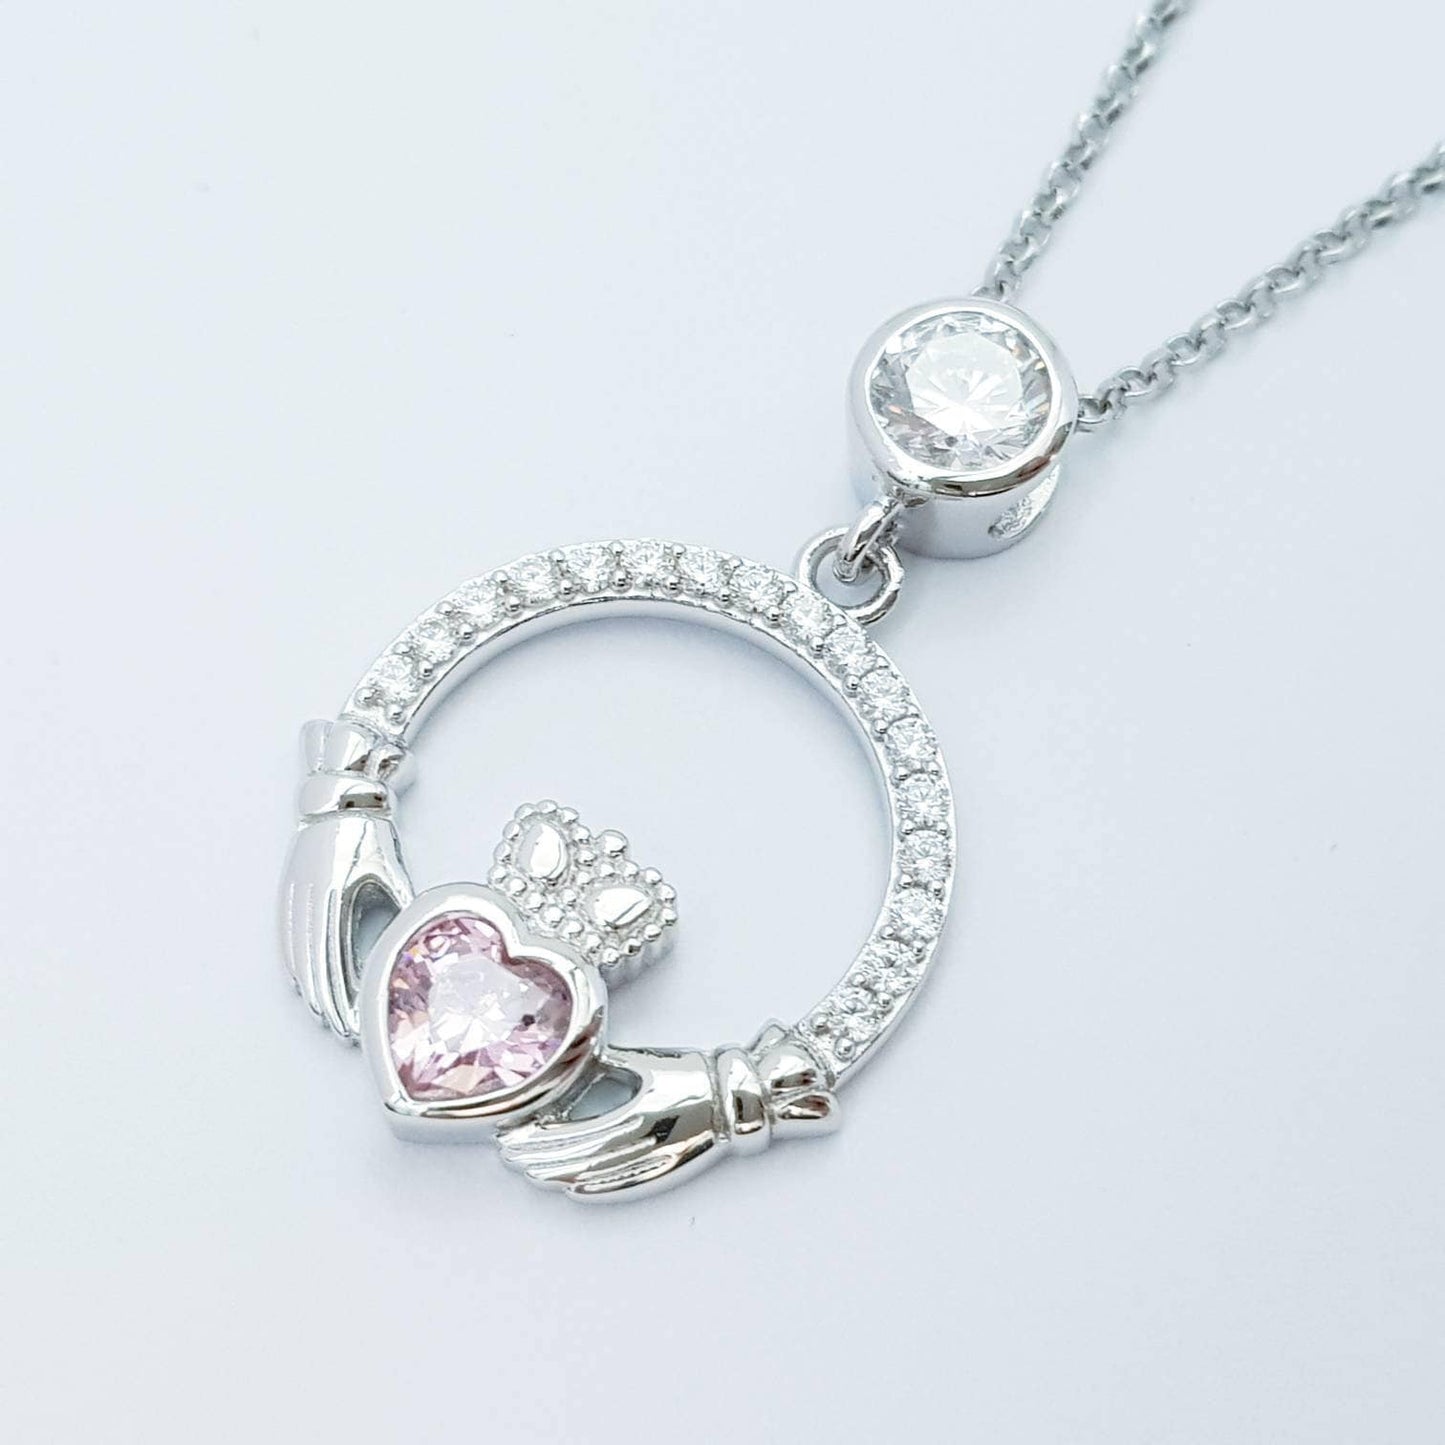 Pink Claddagh pendant, claddagh necklace, silver claddagh pendant with October birthstone